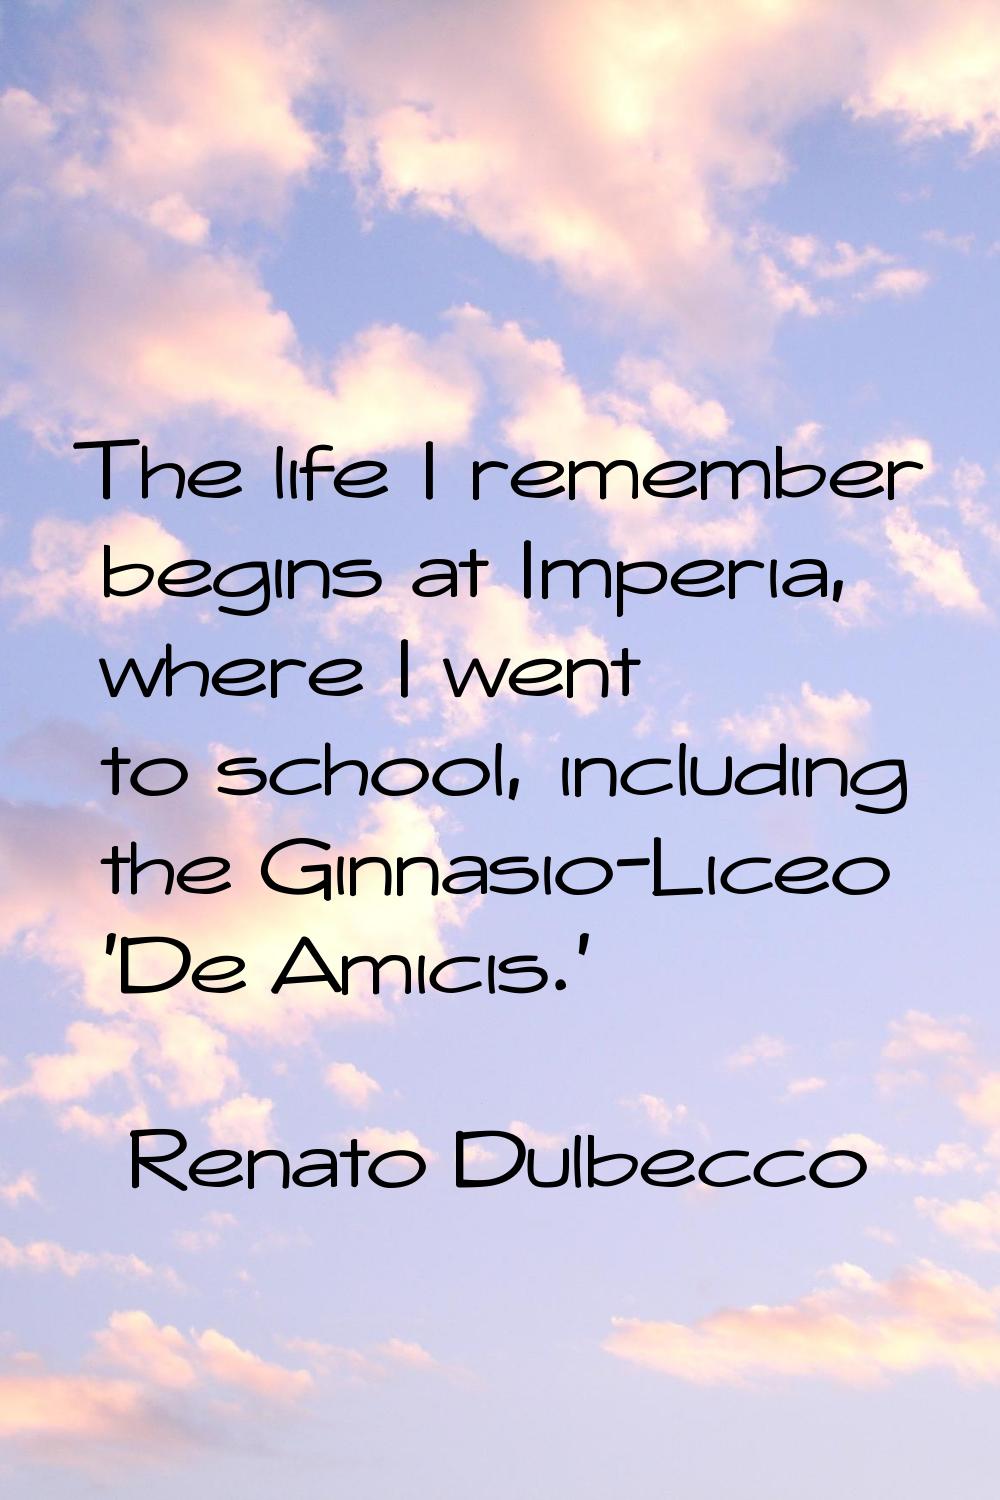 The life I remember begins at Imperia, where I went to school, including the Ginnasio-Liceo 'De Ami